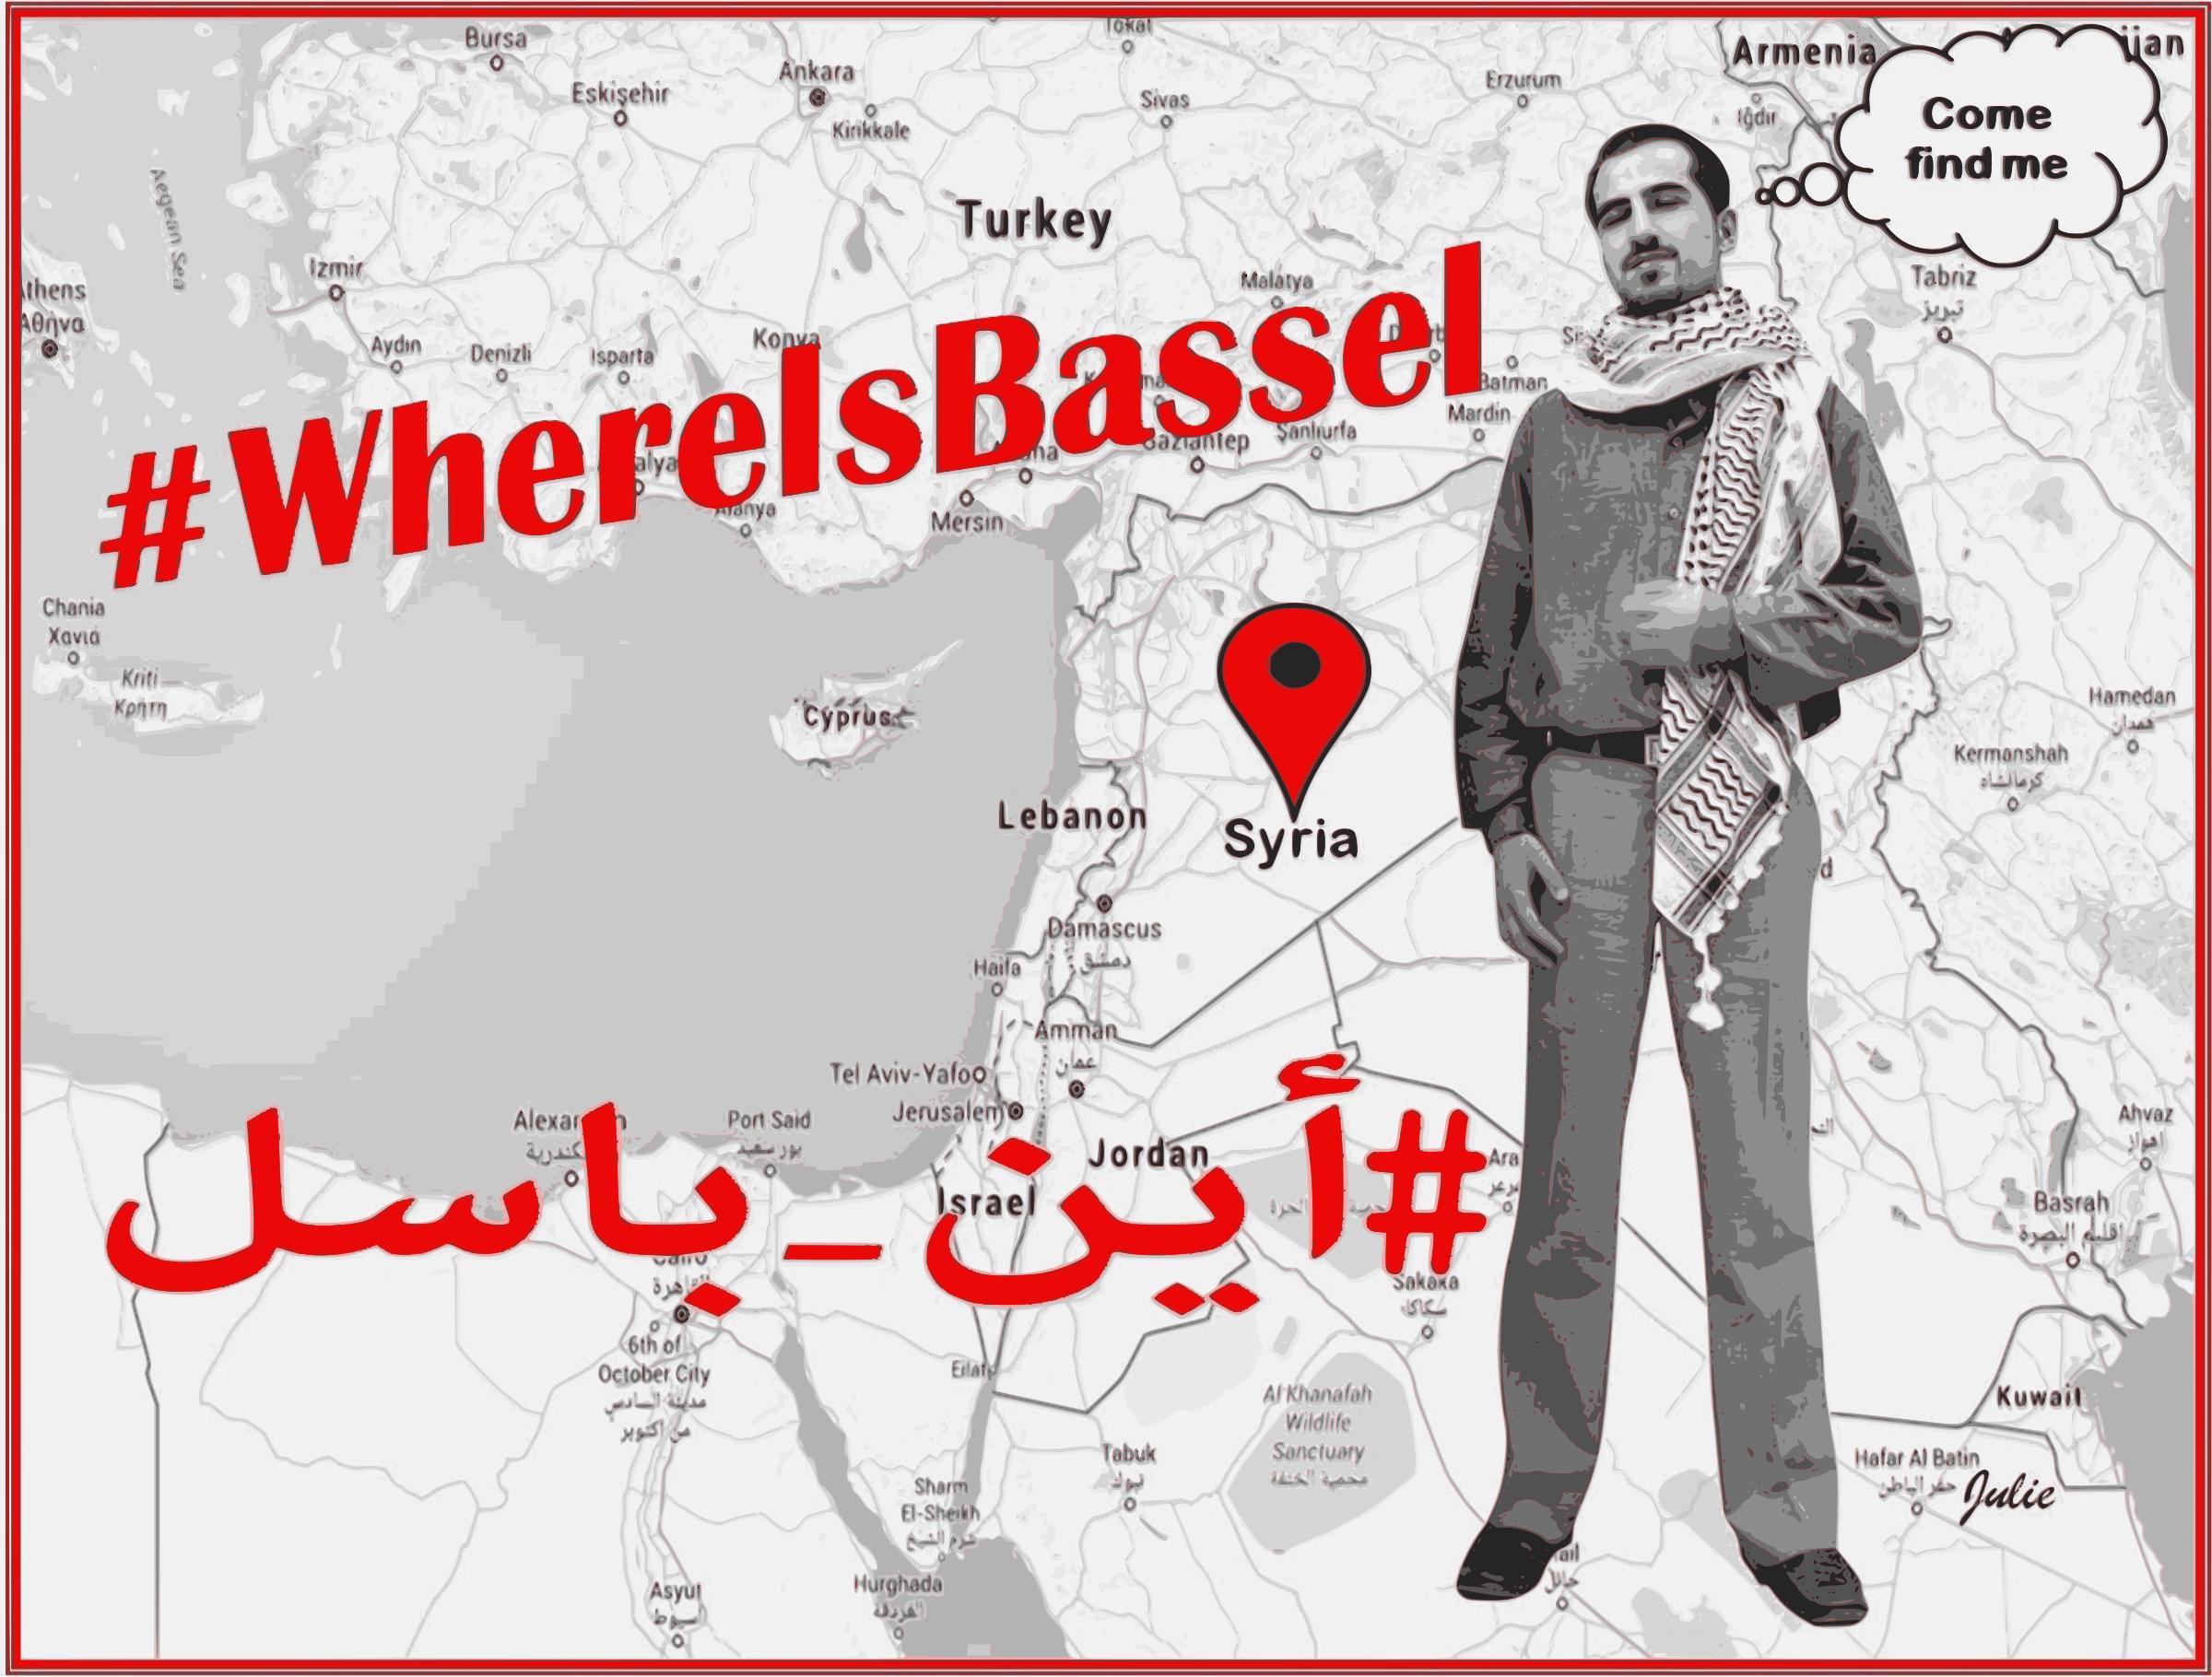 WhereIsBassel Come To Me icons